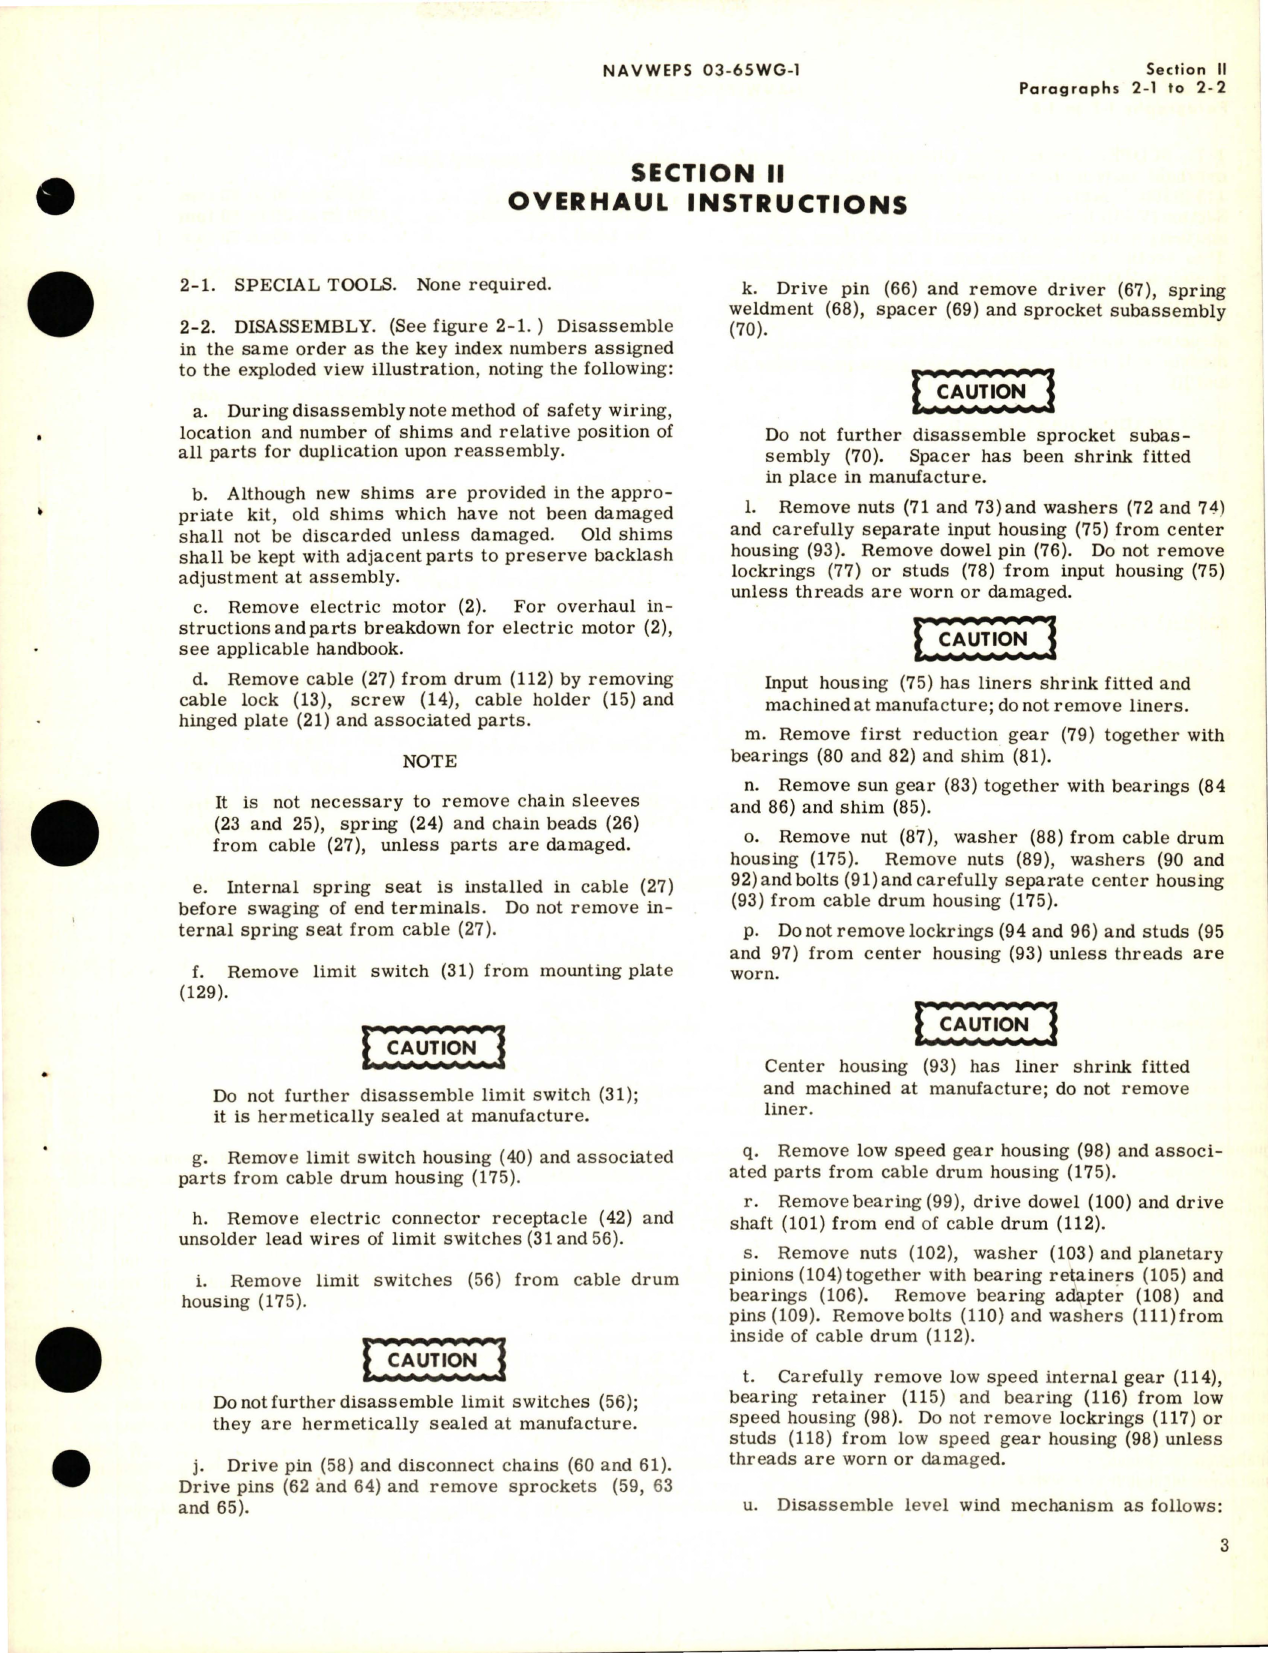 Sample page 5 from AirCorps Library document: Overhaul Instructions for Retrieving Winch - Parts 1184R100